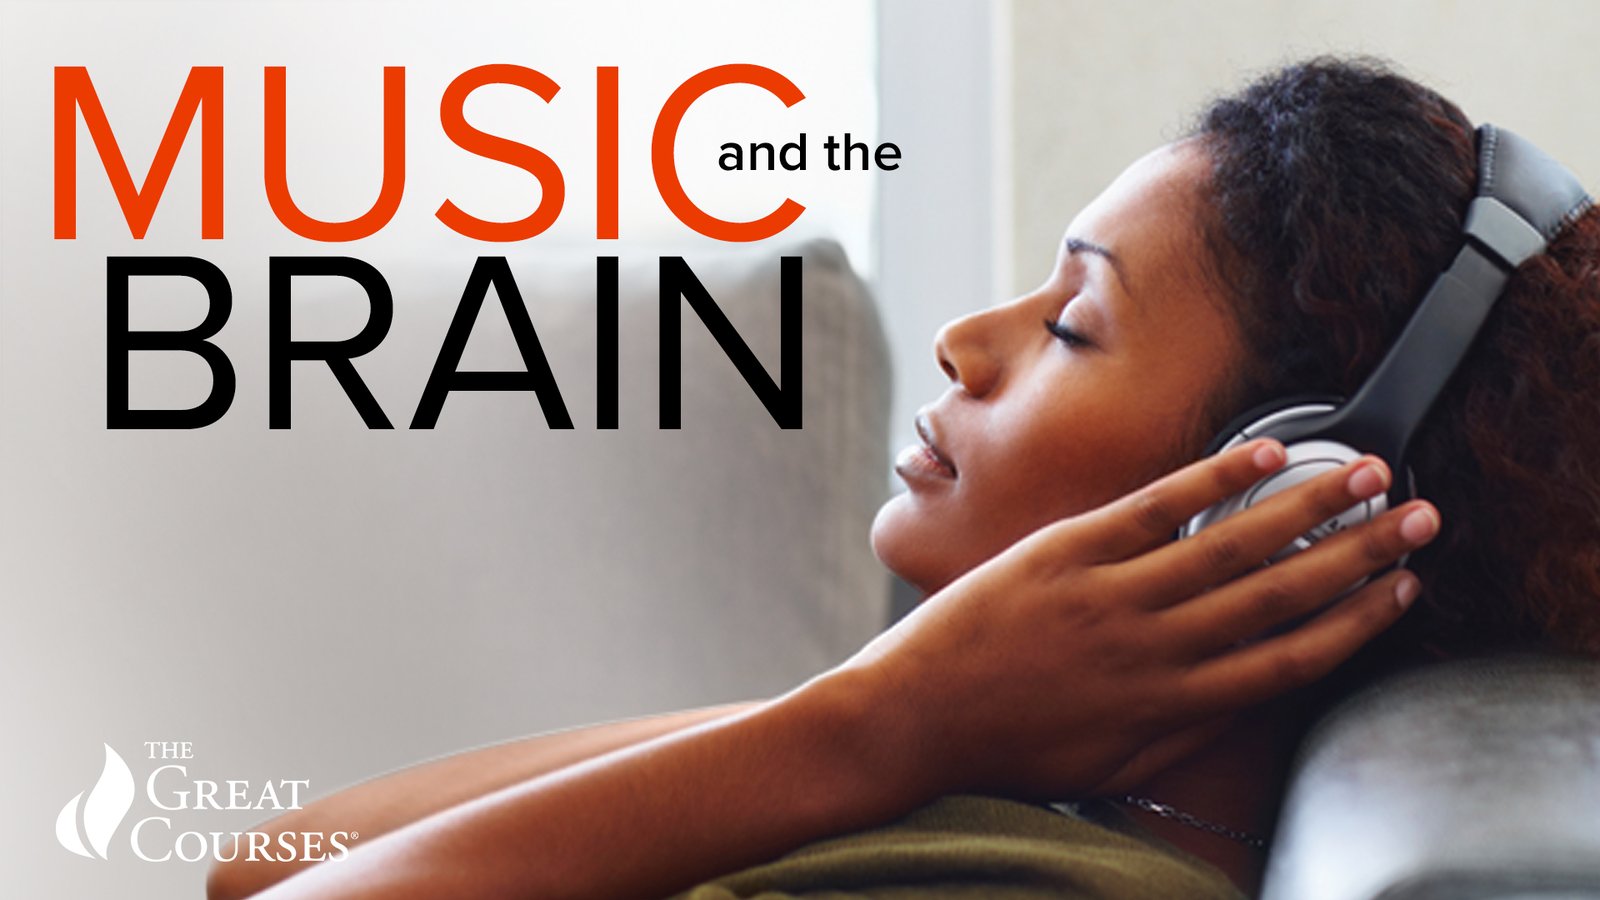 Music and the Brain